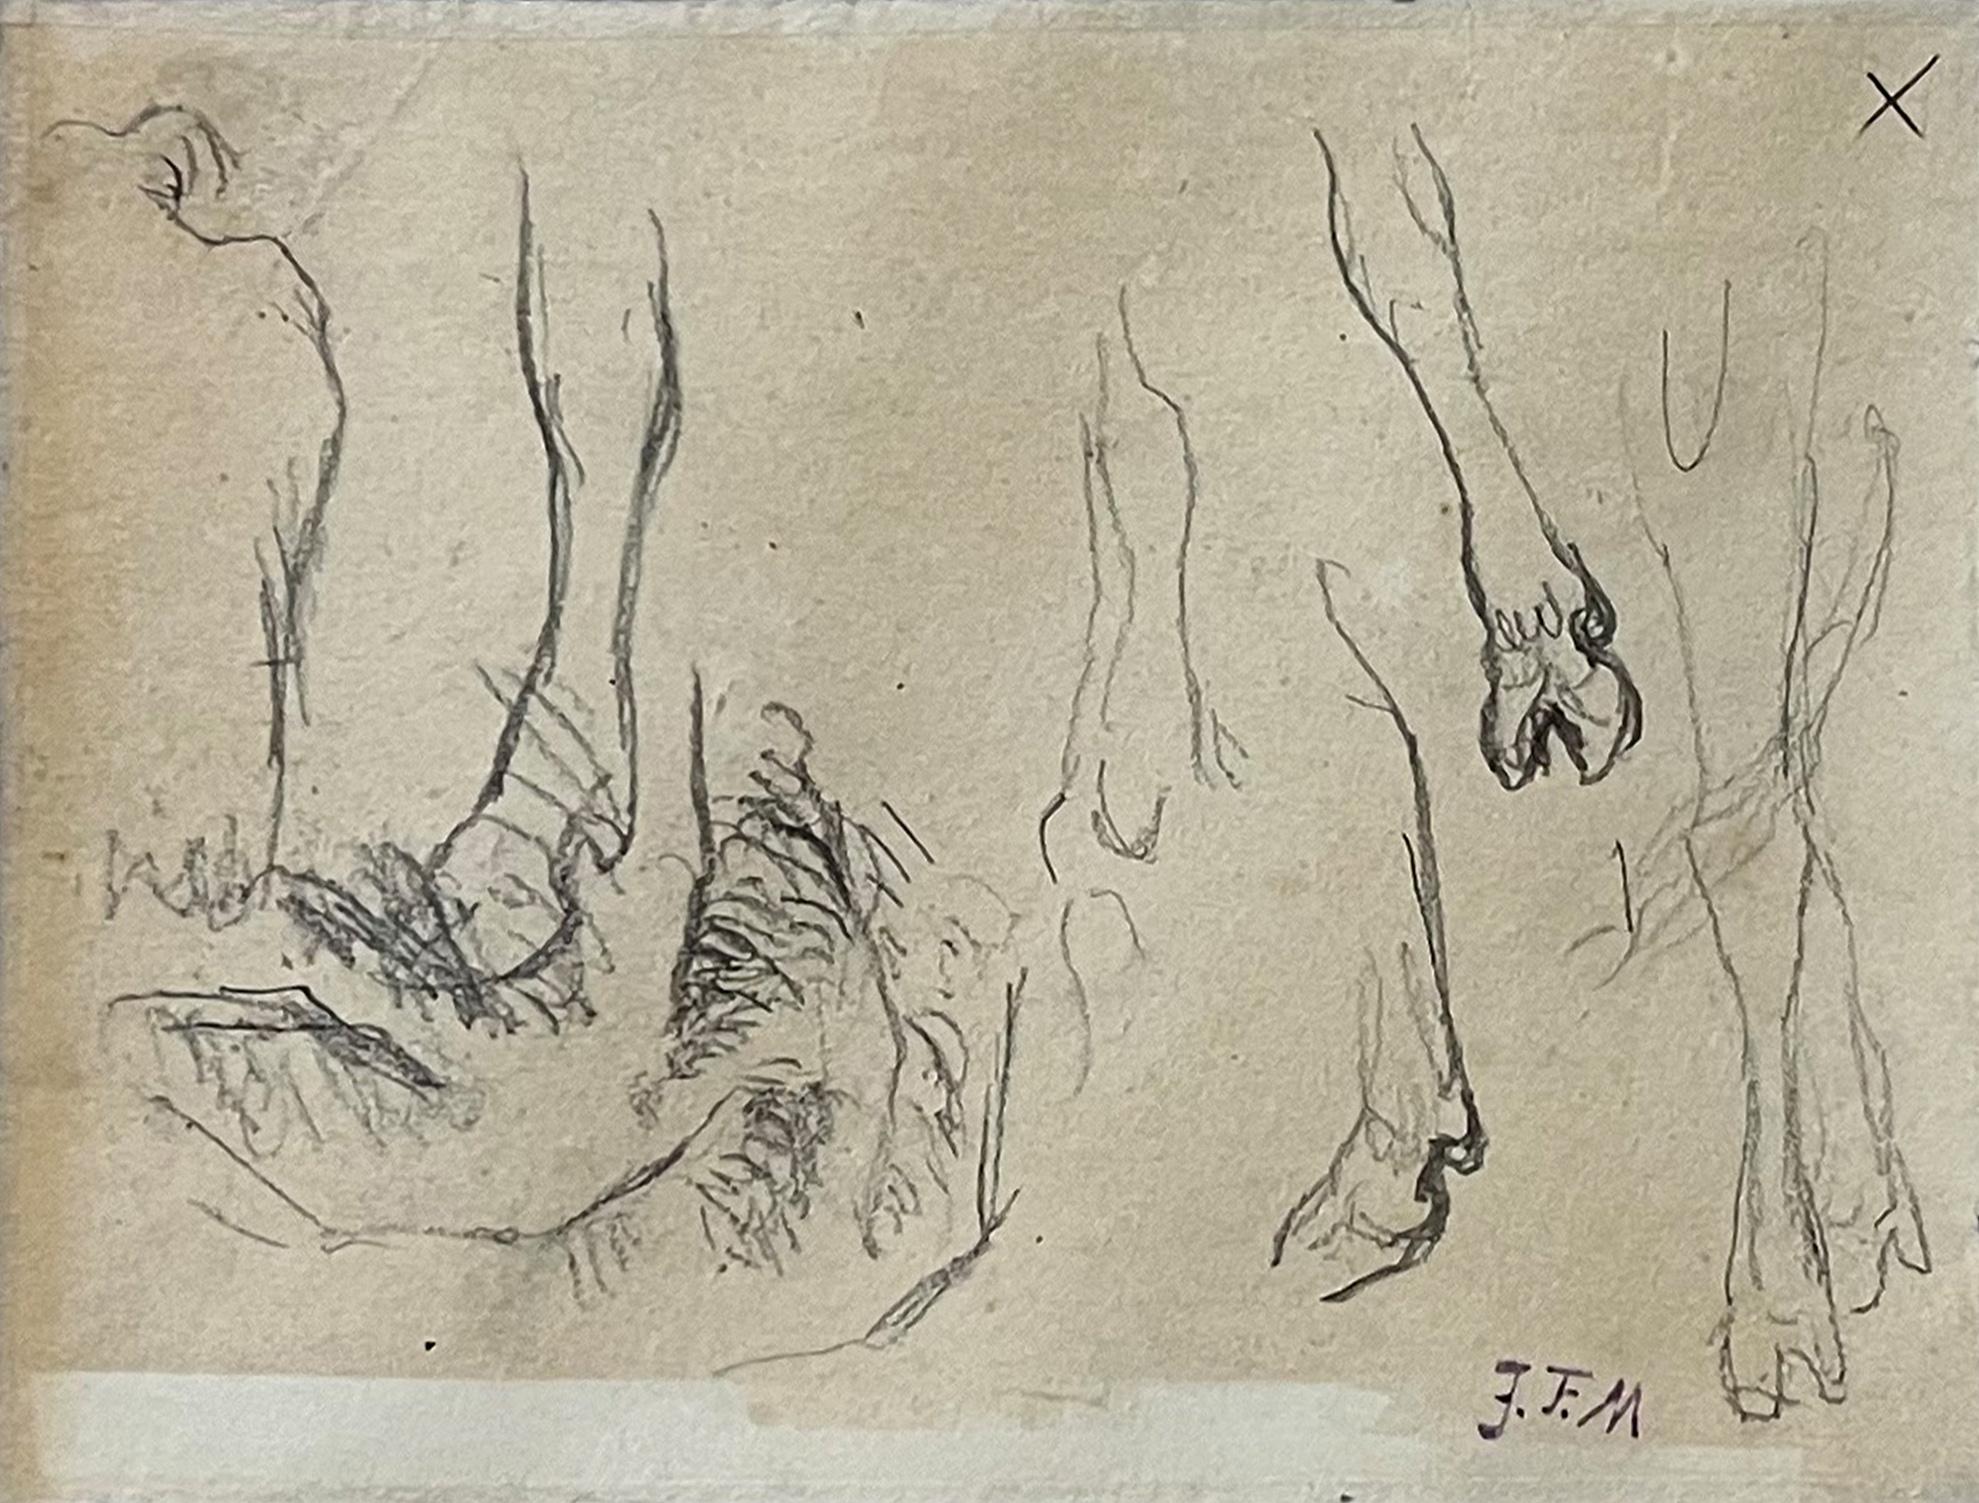 Study of a hand and landscape, on the back, study of cow legs and hooves - Barbizon School Art by Jean François Millet